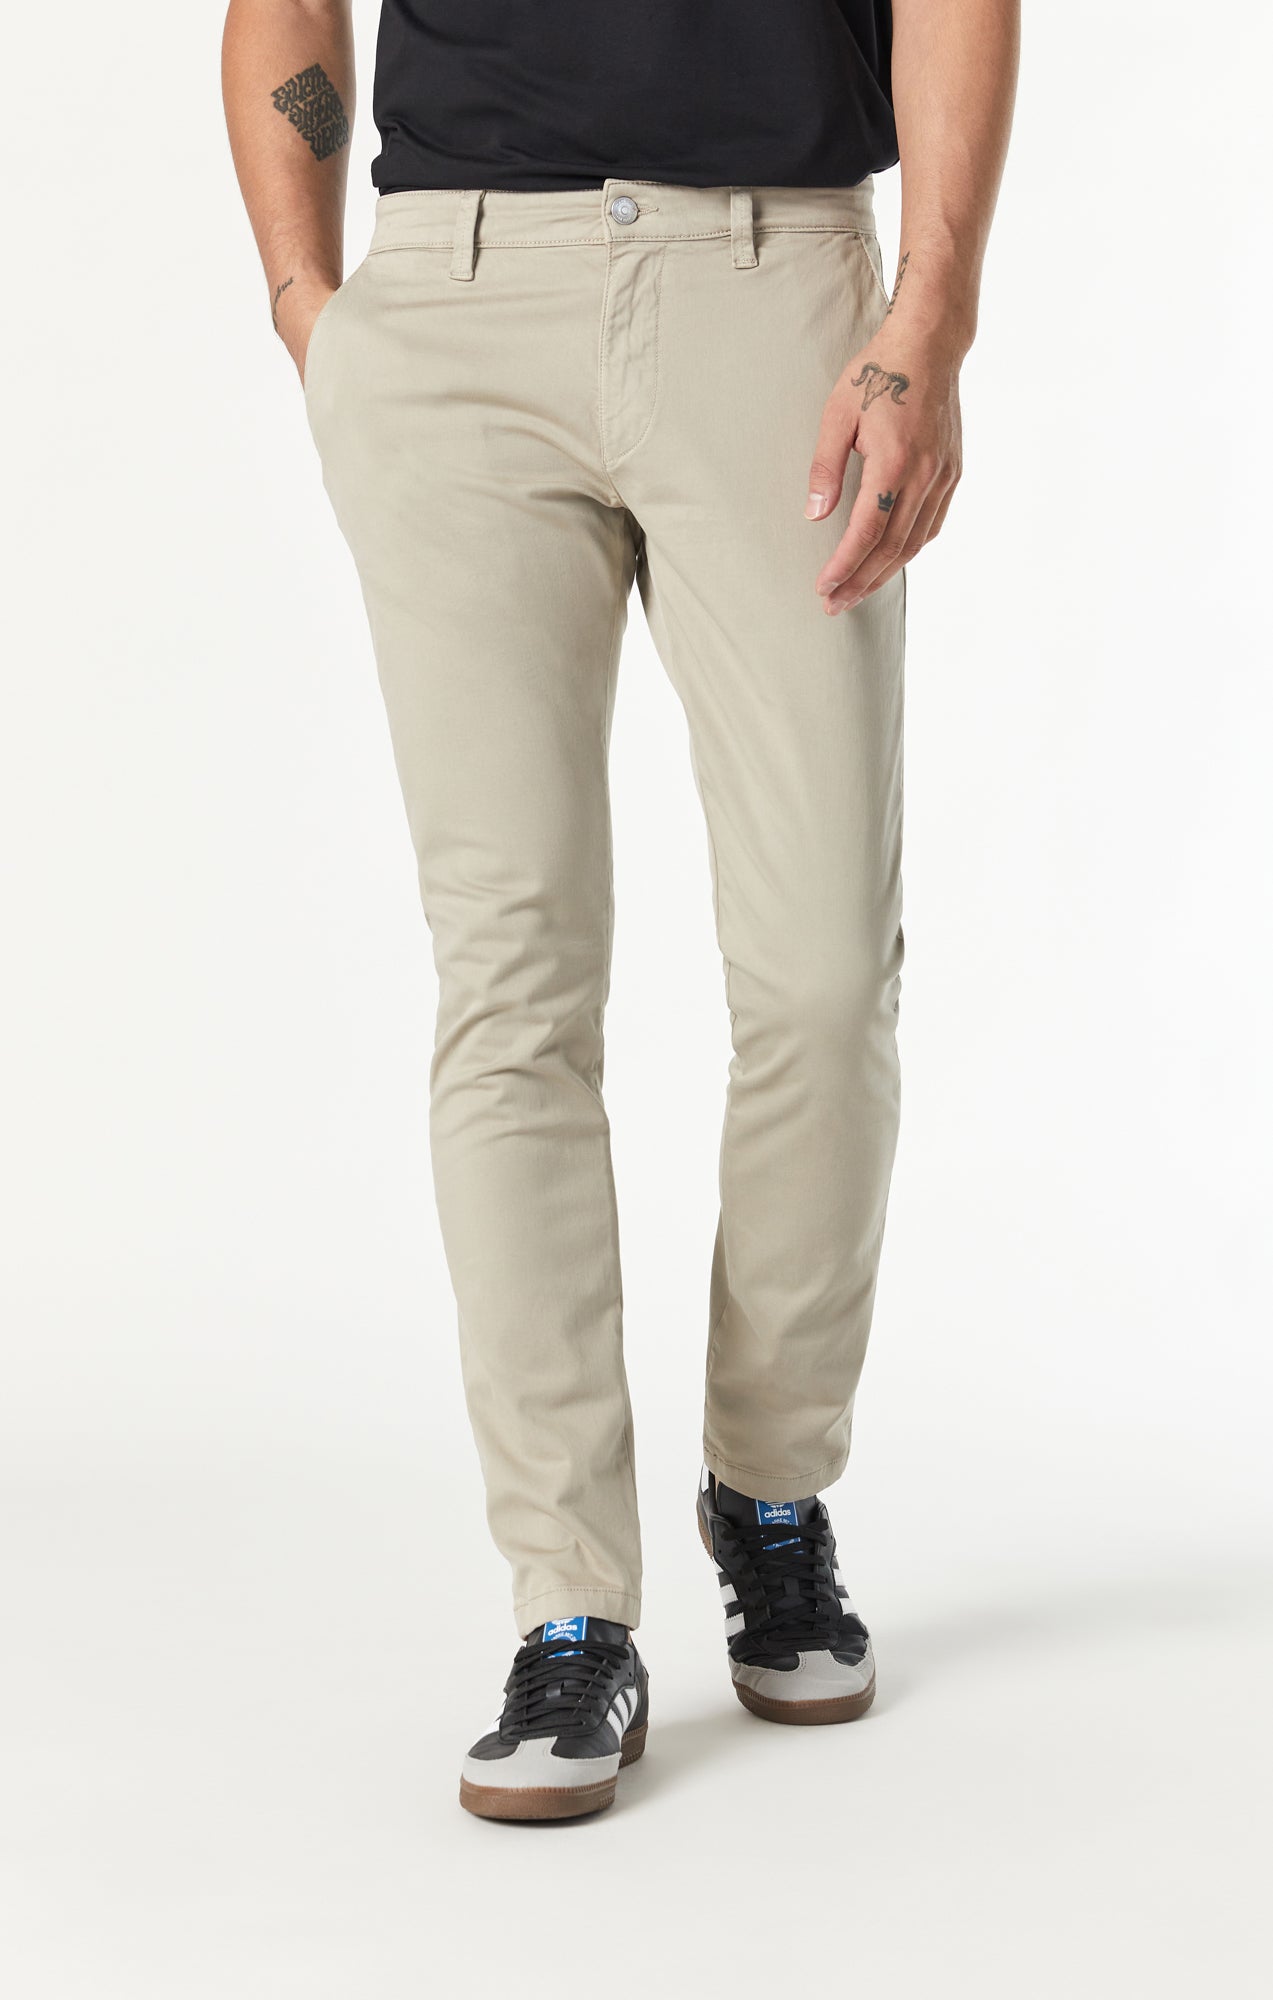 Men's Daily Casual Pant Trouser Solid Color Full Length Pants Slim Pocket  Zipper Fly Size 50 Pants for Men, Khaki, 3X-Large : : Clothing,  Shoes & Accessories